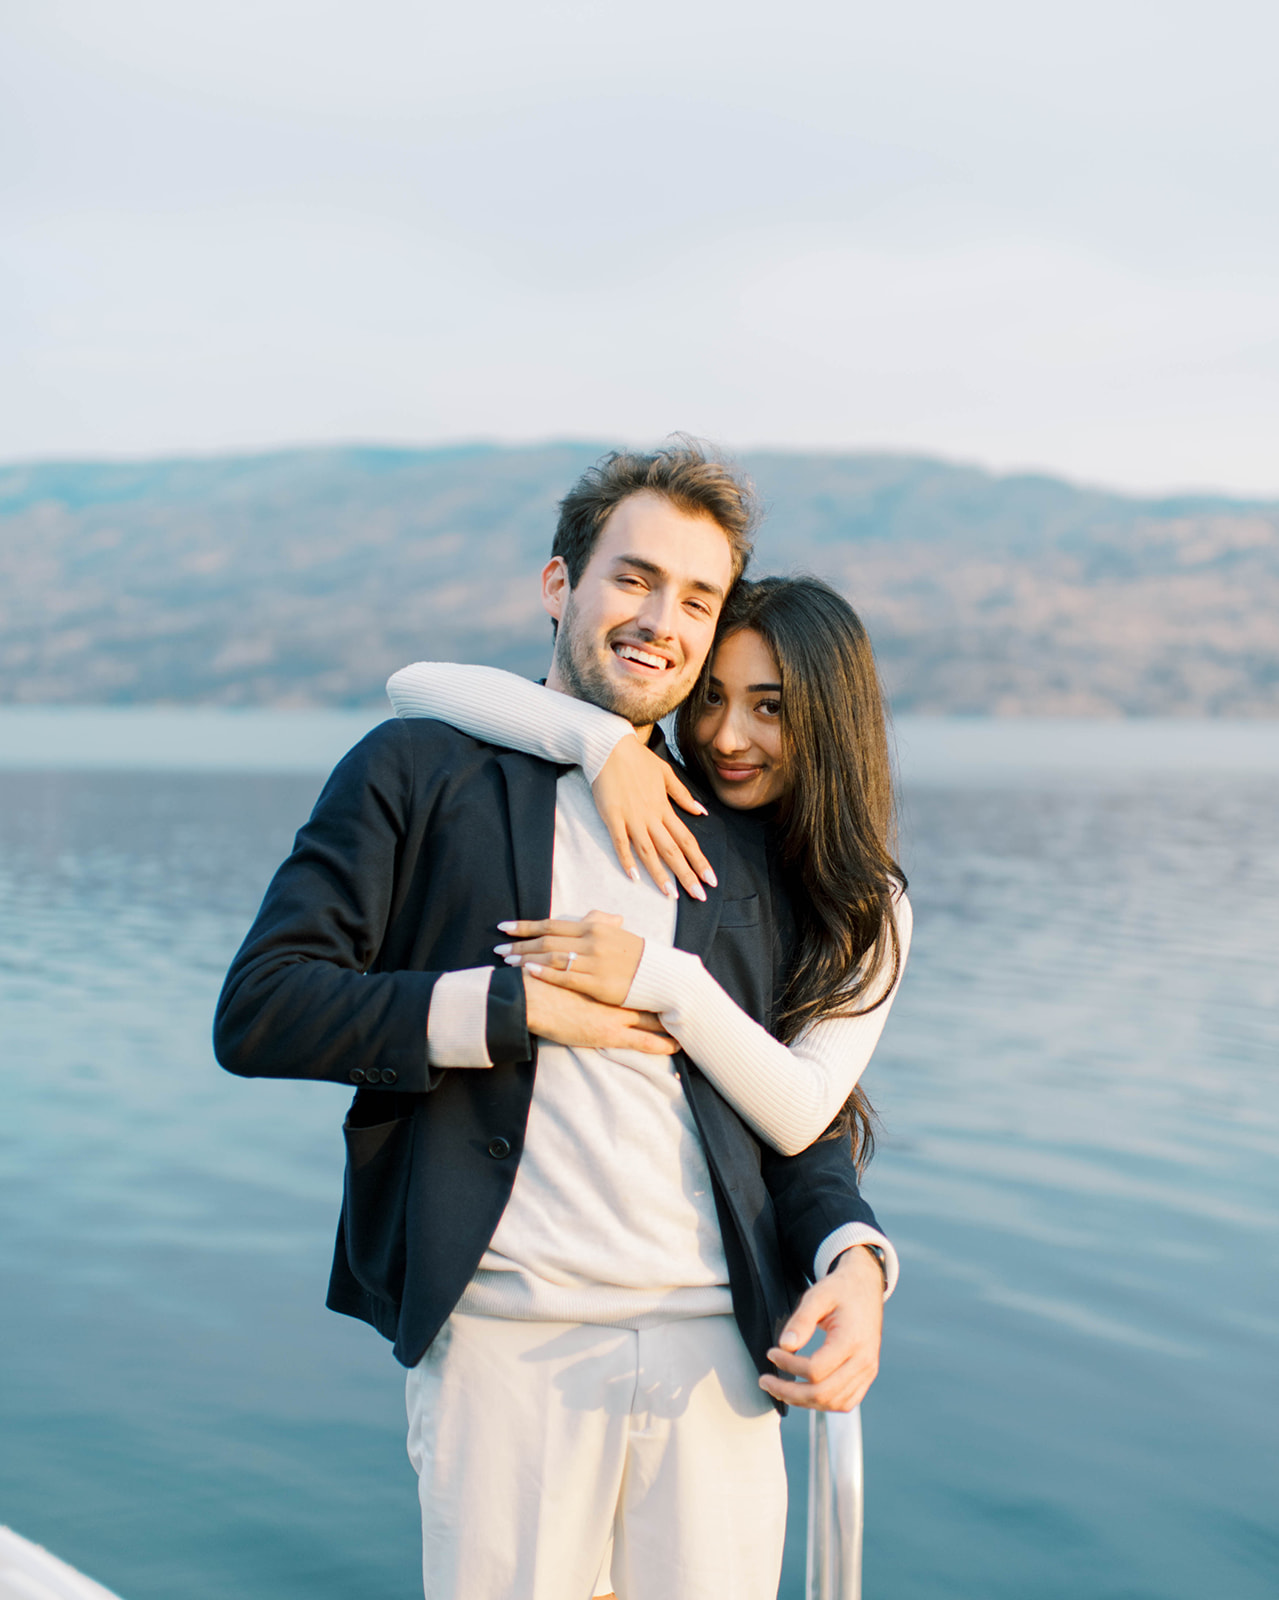 Perfectly Planned Romantic Proposal at Peachland Beach, in the Okanagan Valley, captured on film by Kelowna Wedding Photographer, Minted Photography. - summer proposal ideas, surprise proposal, romantic proposal inspiration, romantic proposal ideas